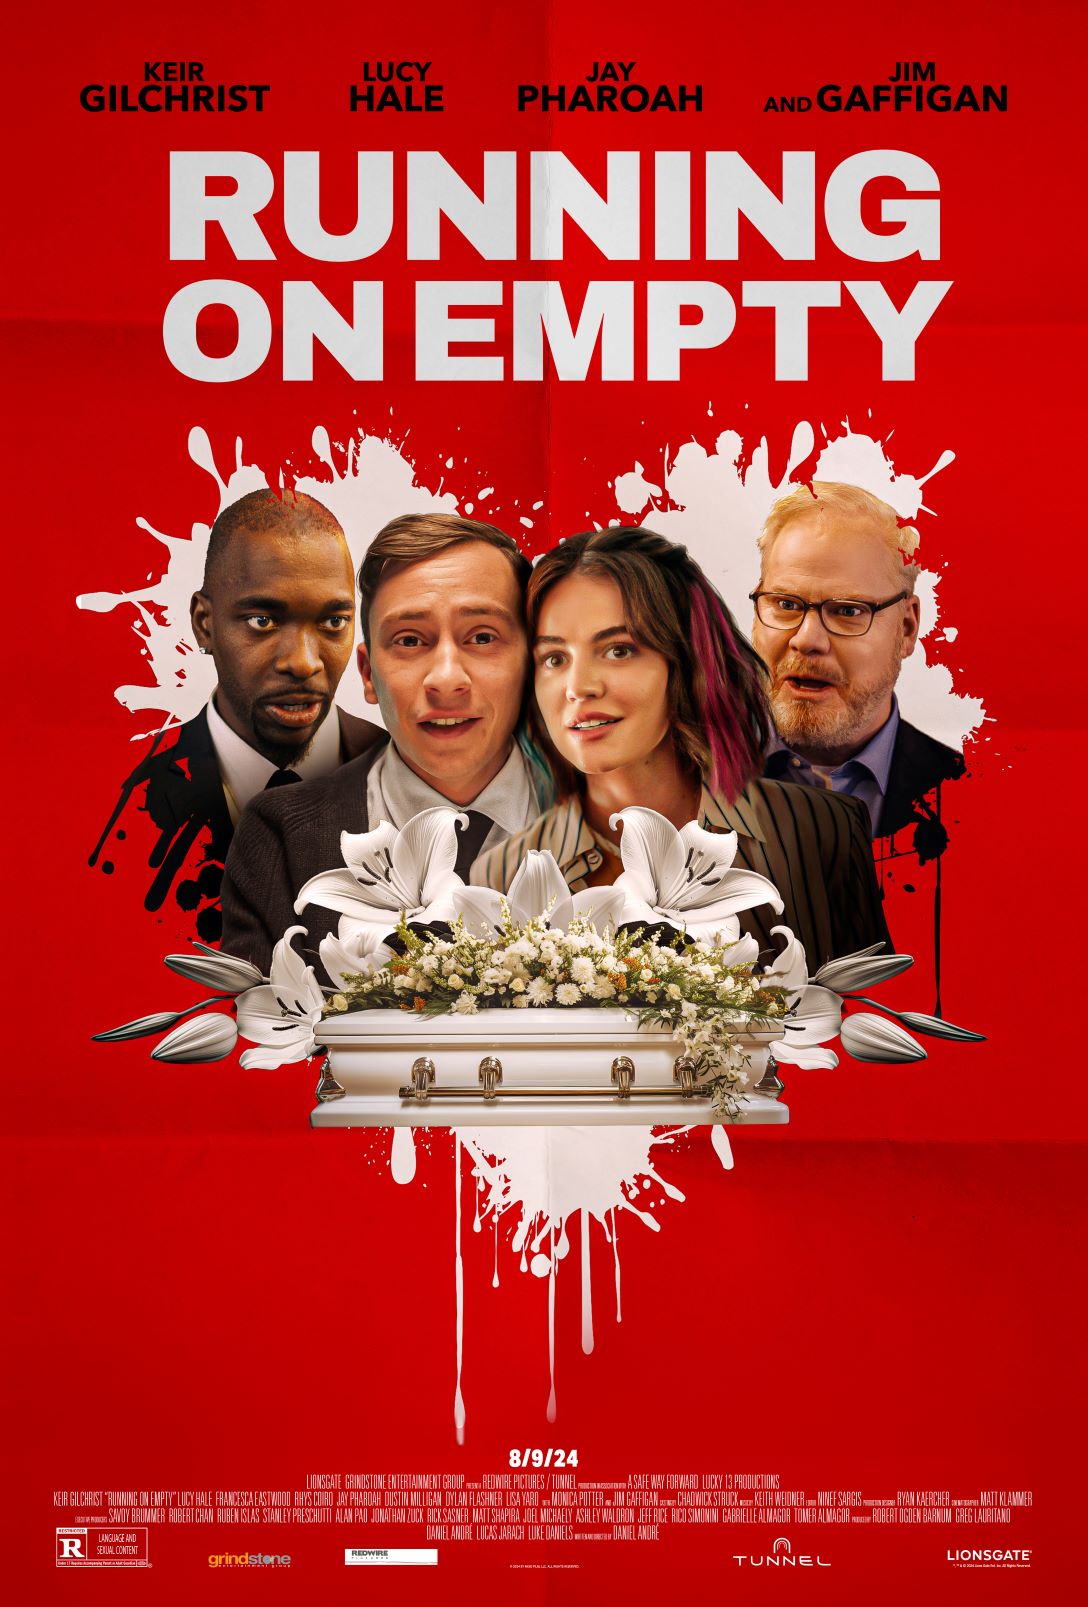 RUNNING ON EMPTY POSTER (Lionsgate)